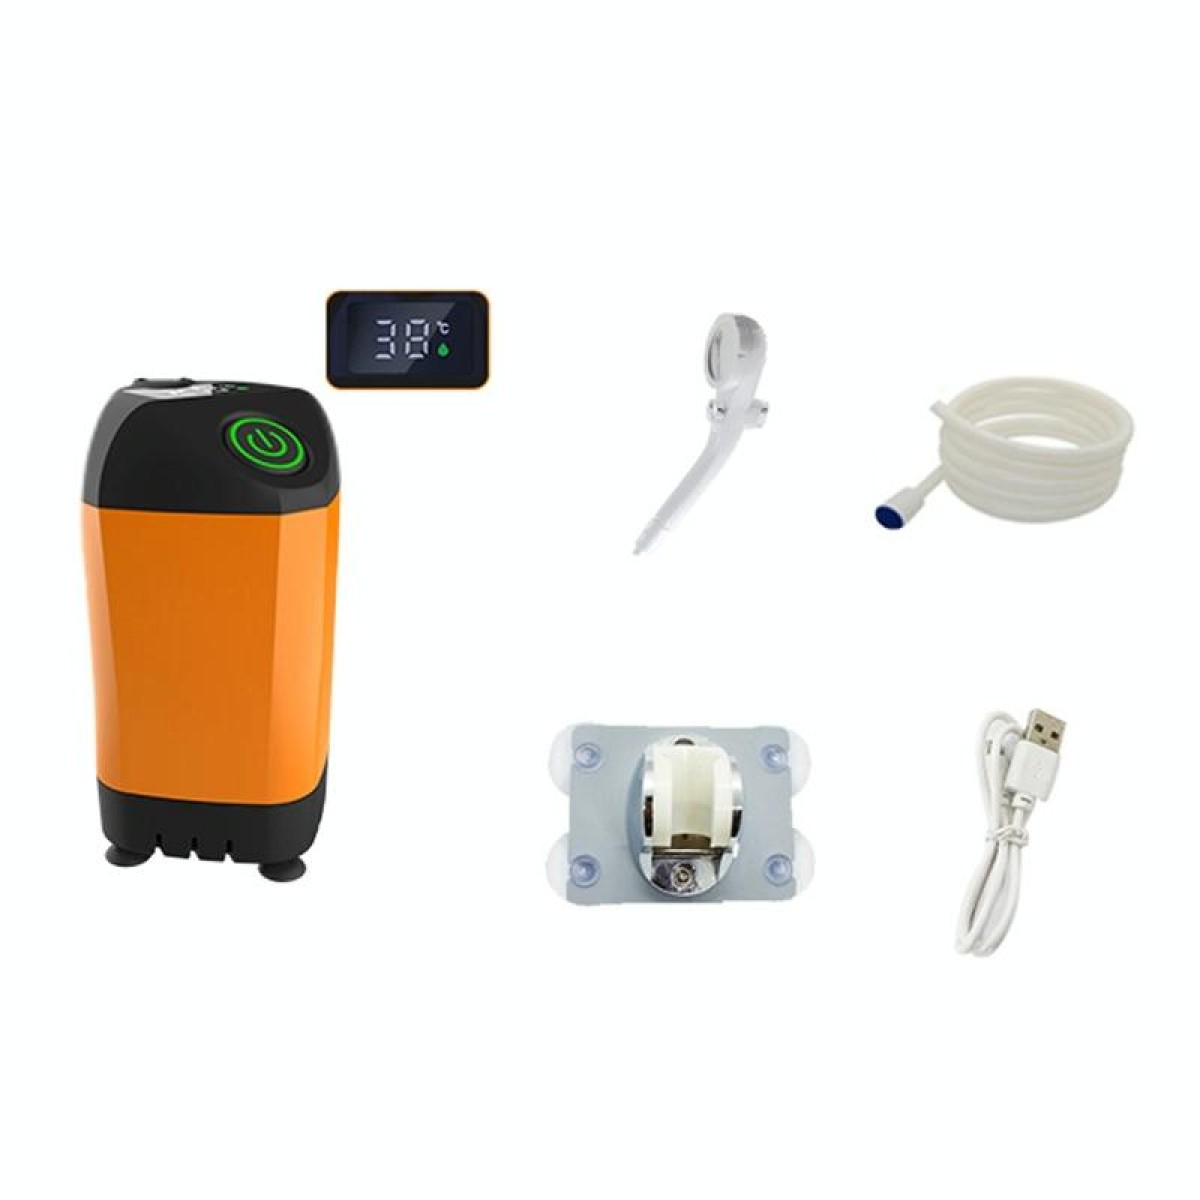 Outdoor Bath Artifact Field Dormitory Simple Electric Shower, Specification: Digital Display 4400mAh